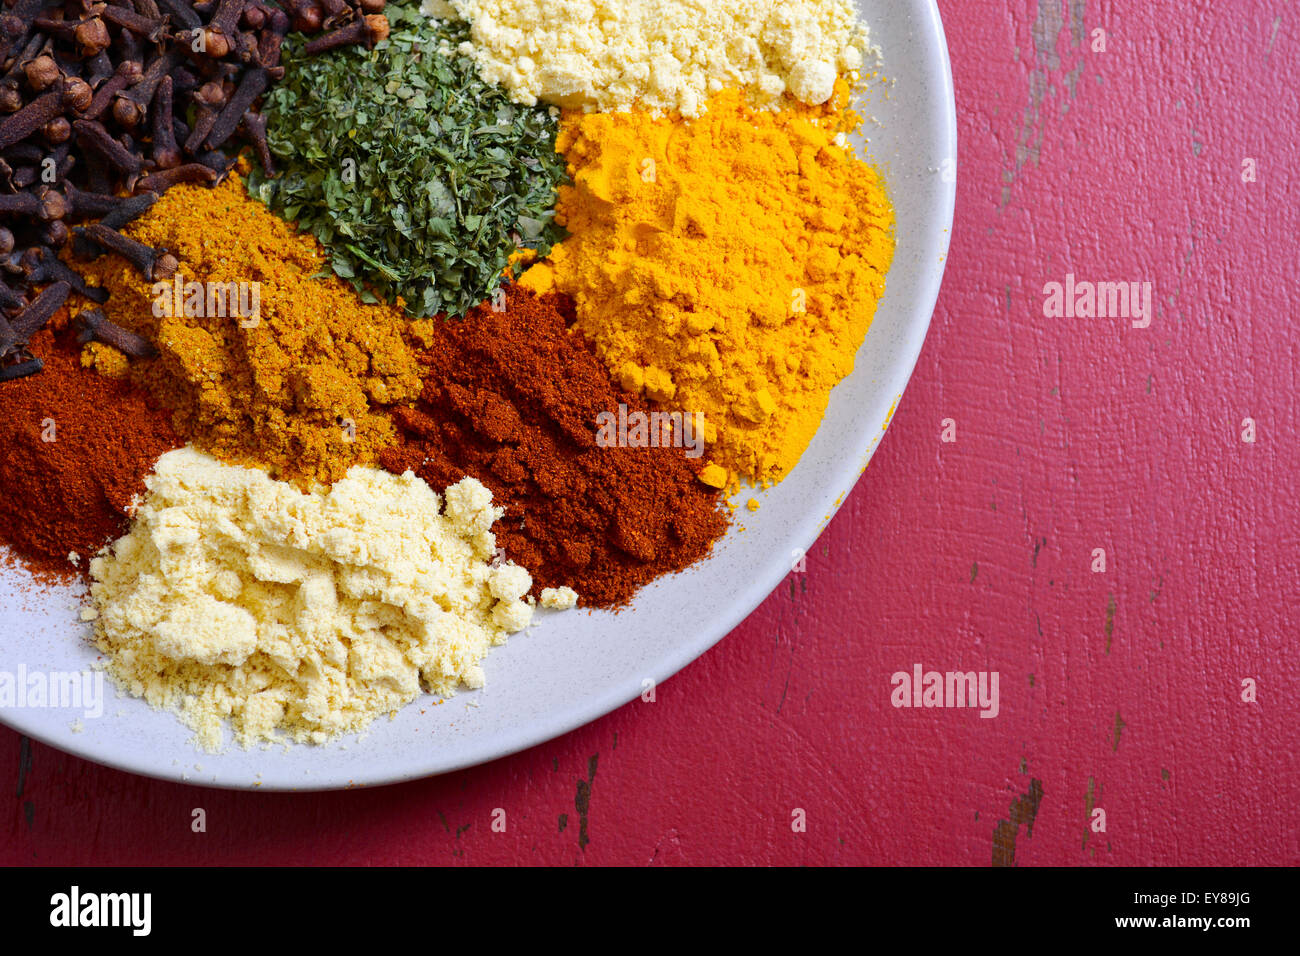 Colorful cooking spices and herbs on round plate on vintage red wood table. Stock Photo